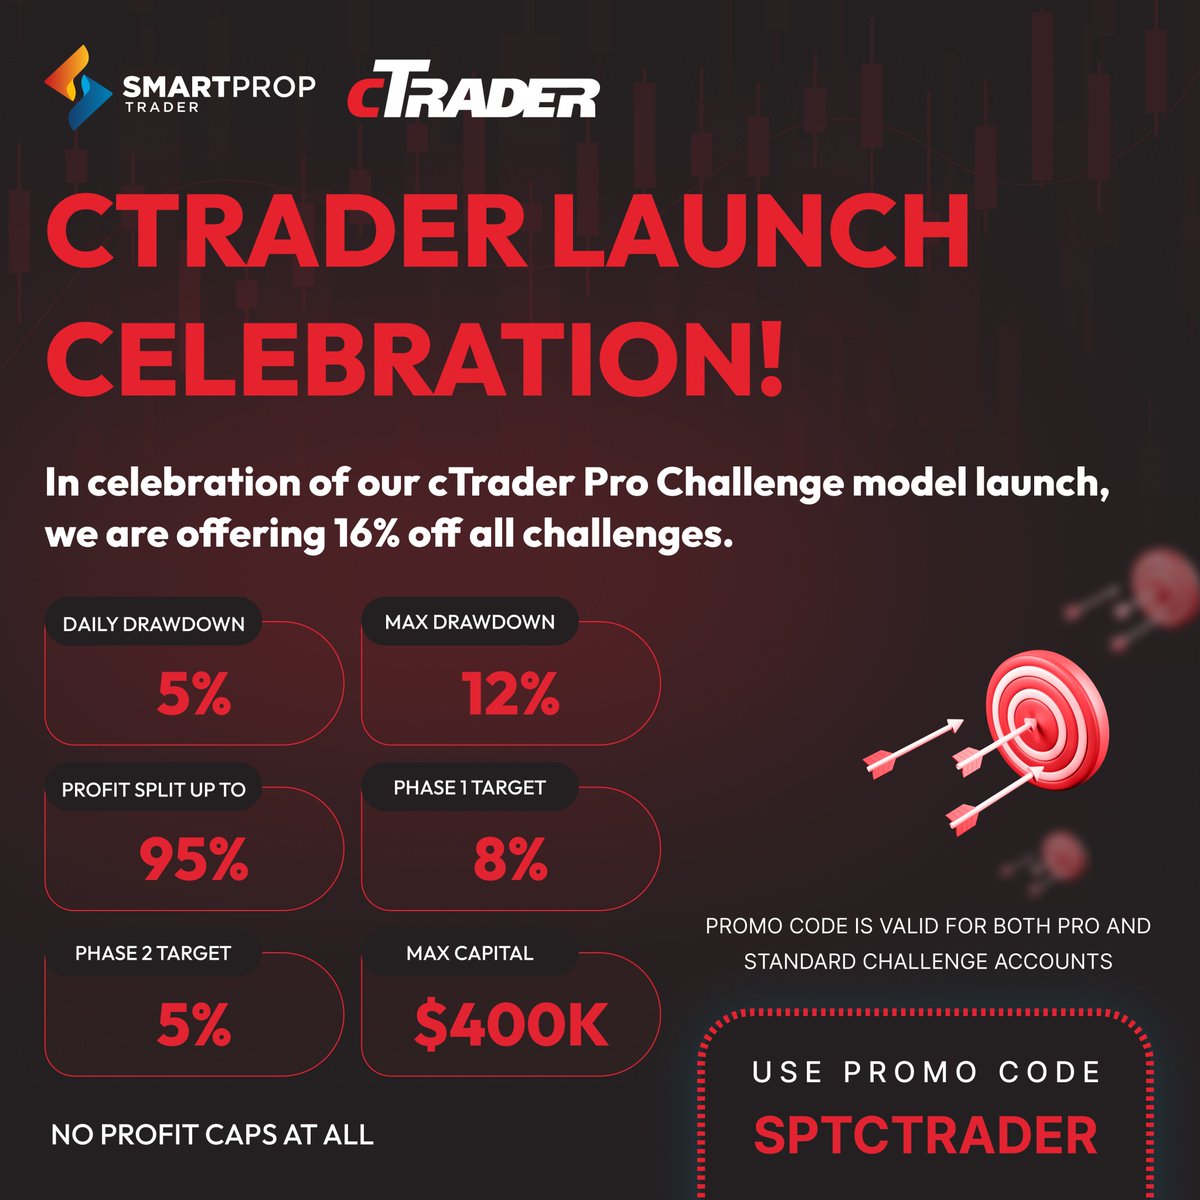 We are still celebrating the launch of cTrader coupled with our Pro Challenge model! 🎯 To continue the celebration, we will be awarding one lucky customer a free $100K cTrader Account based on a drawing from the next 100 purchases. Multiple entries allowed! Use promo code